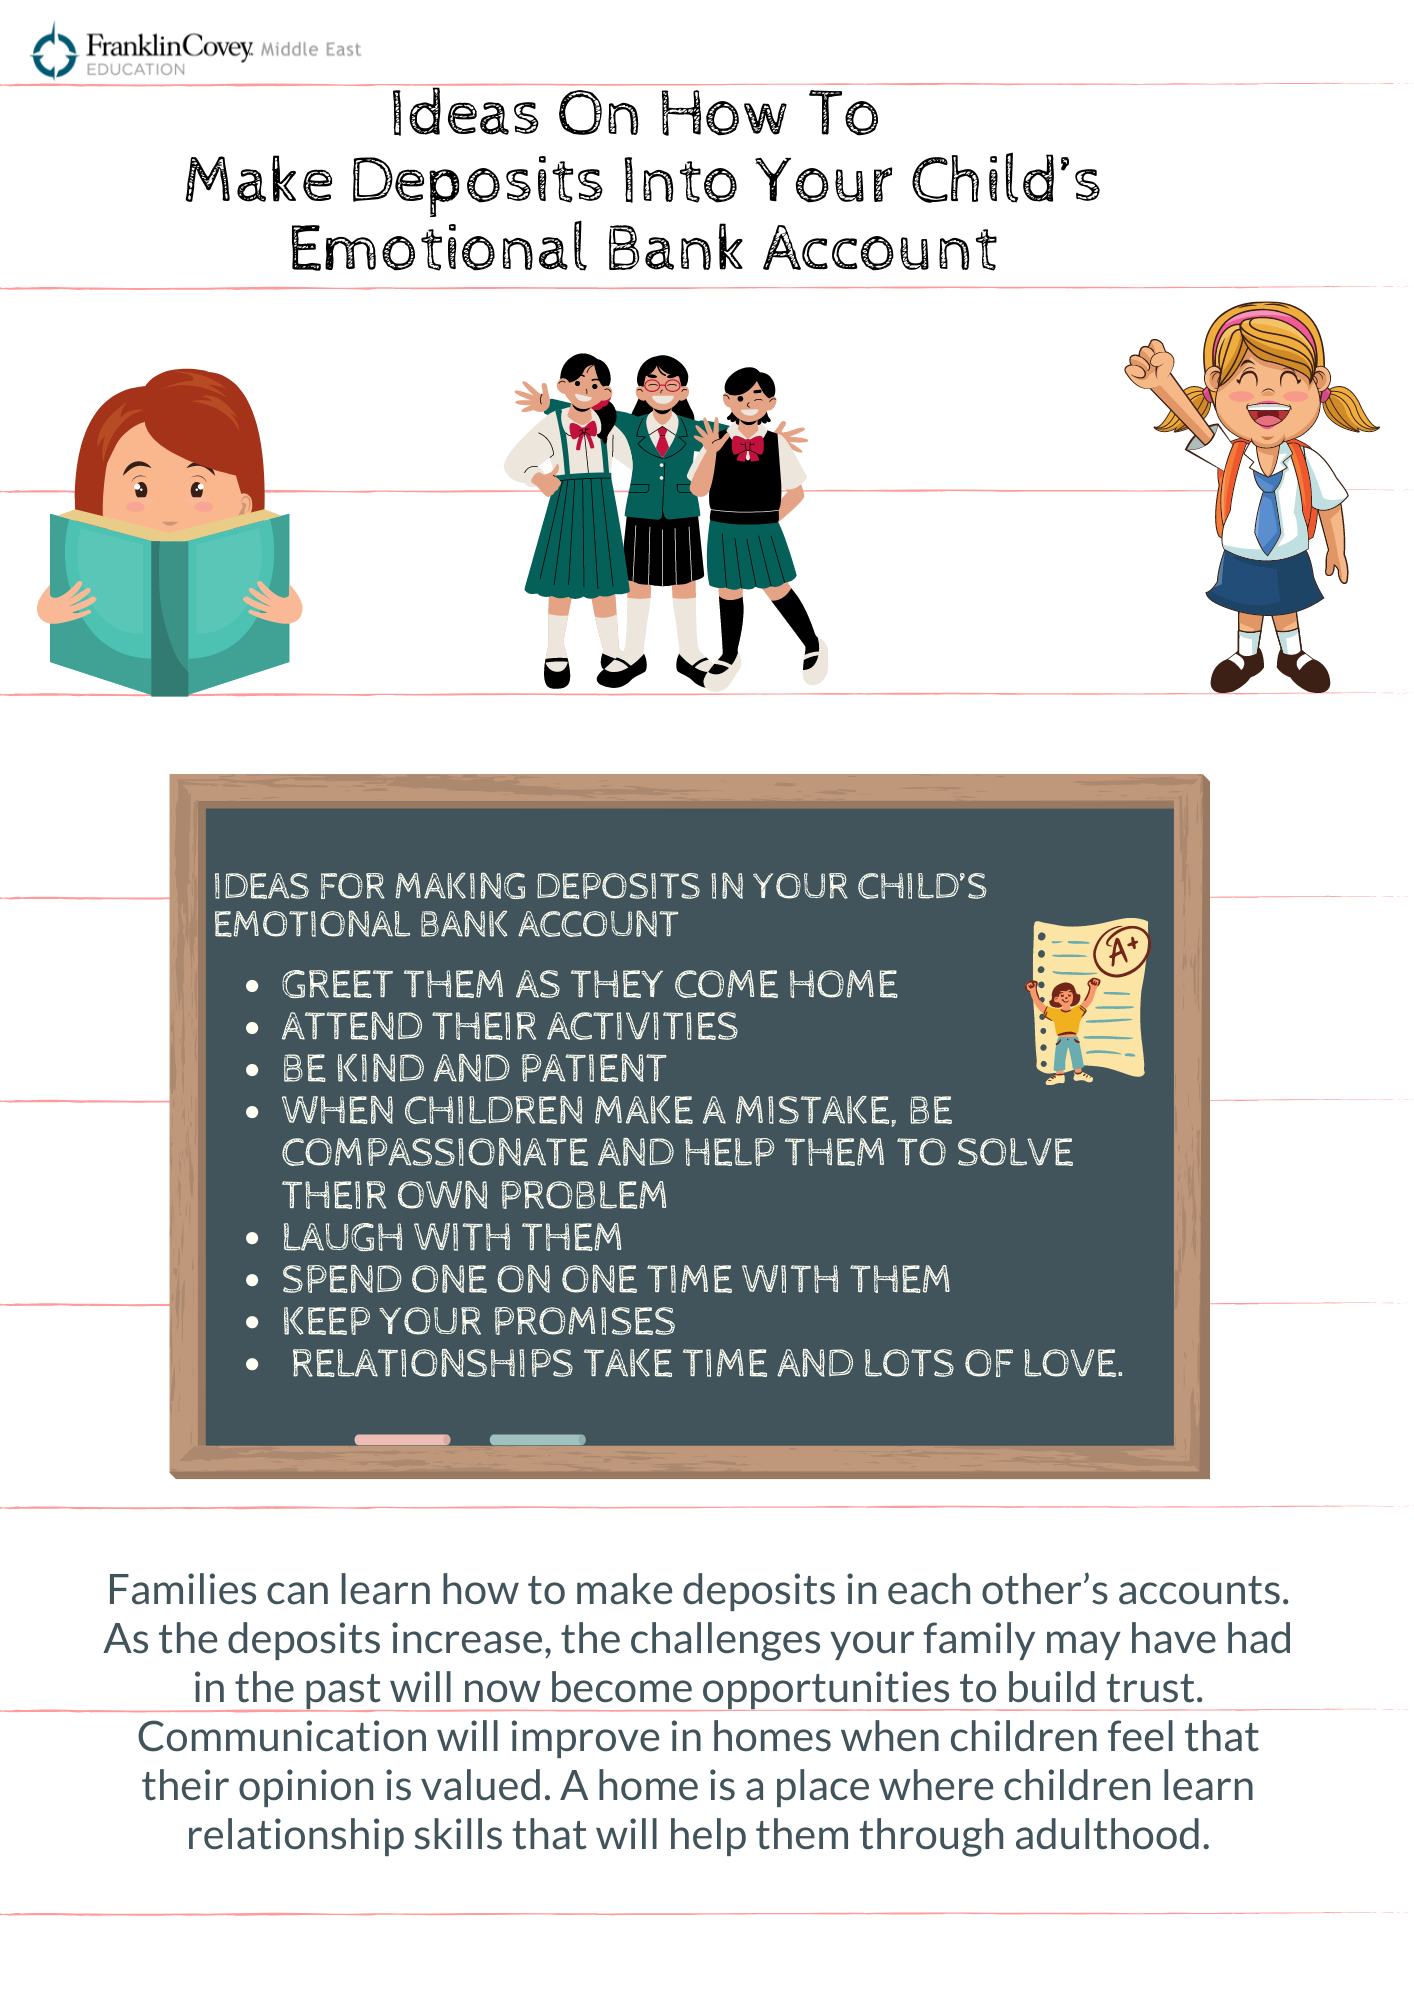 Infograhic: Making Deposits Into Your Child’s Emotional Bank Account